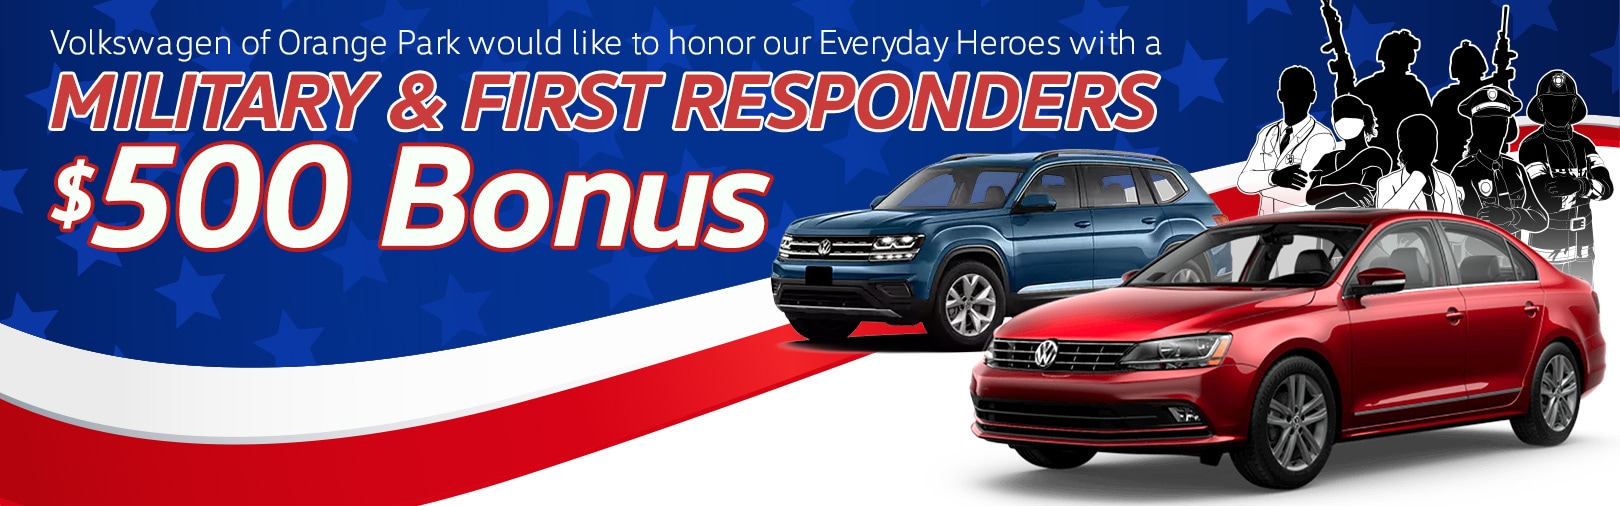 Military and First Responders Program at Volkswagen of ...